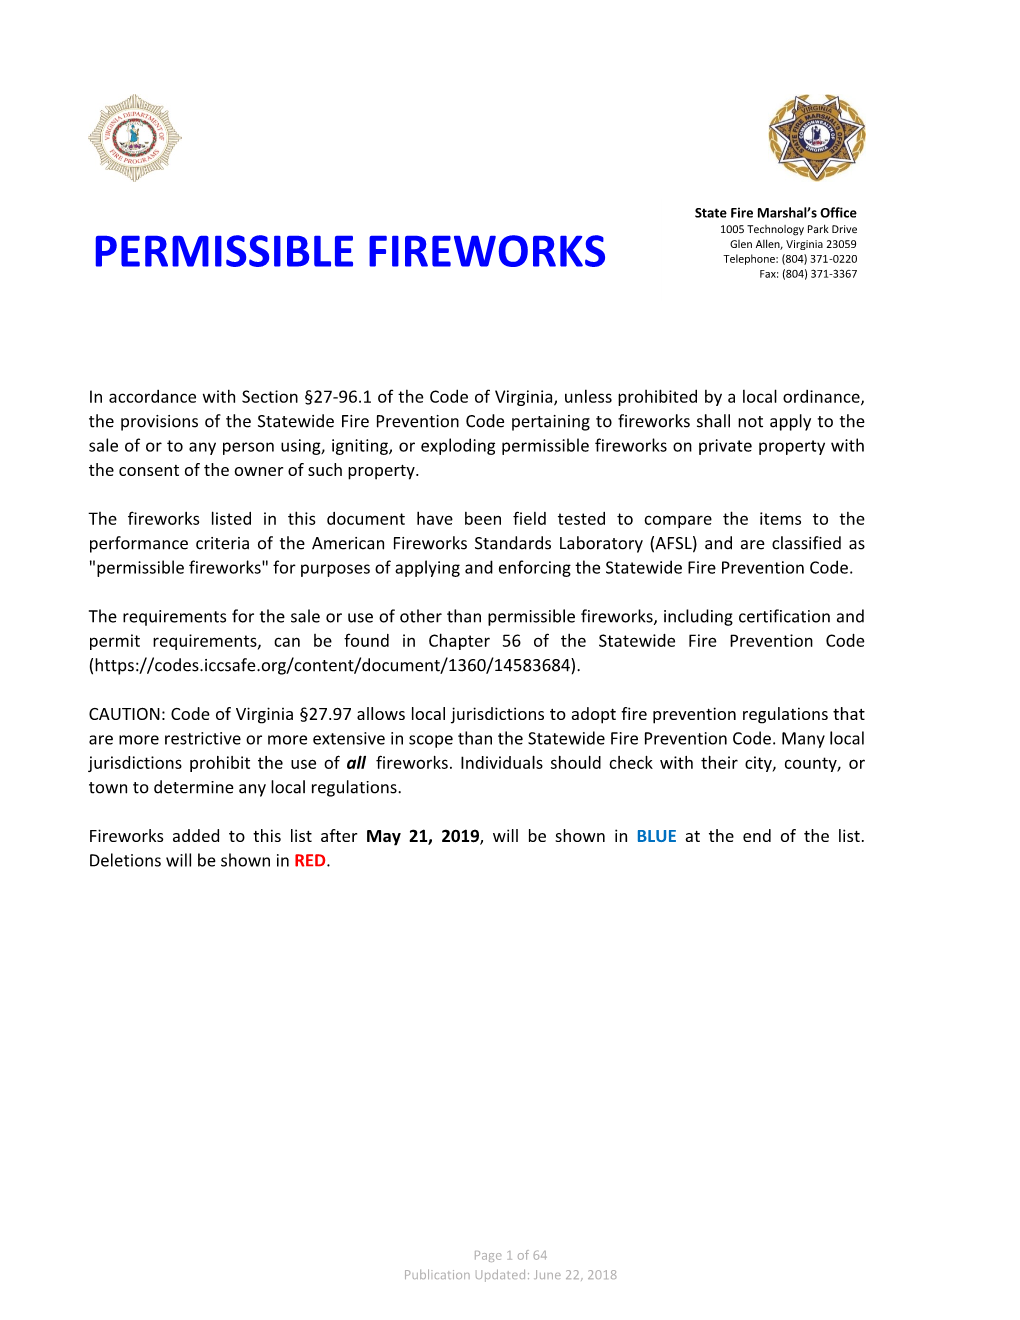 PERMISSIBLE FIREWORKS Telephone: (804) 371-0220 Fax: (804) 371-3367